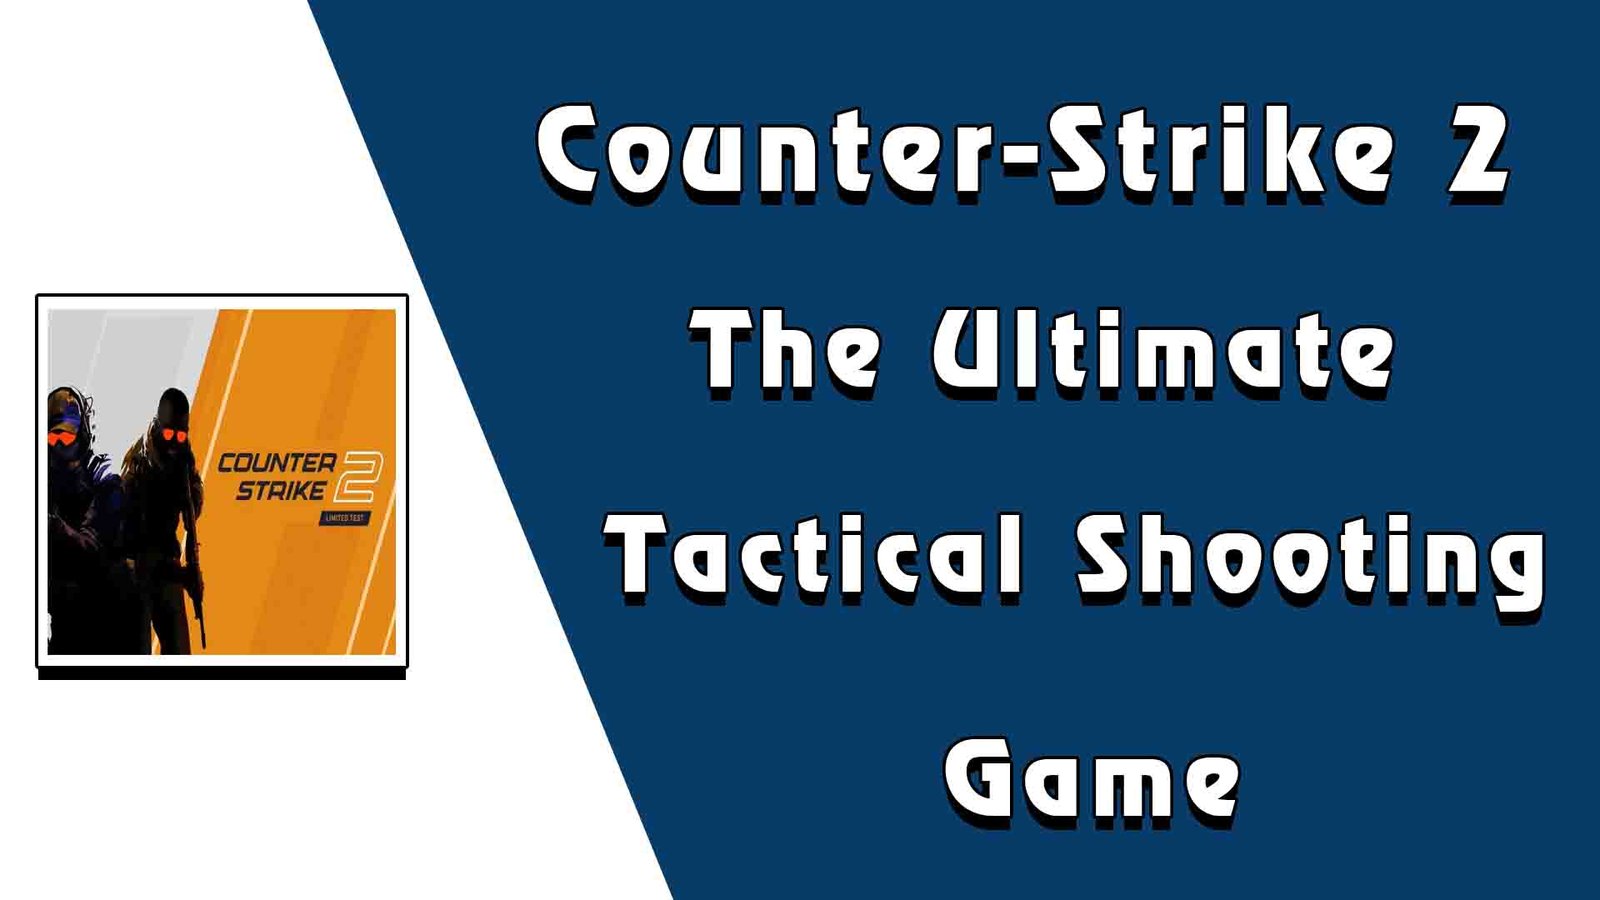 Counter-Strike 2: The Ultimate Tactical Shooting Game